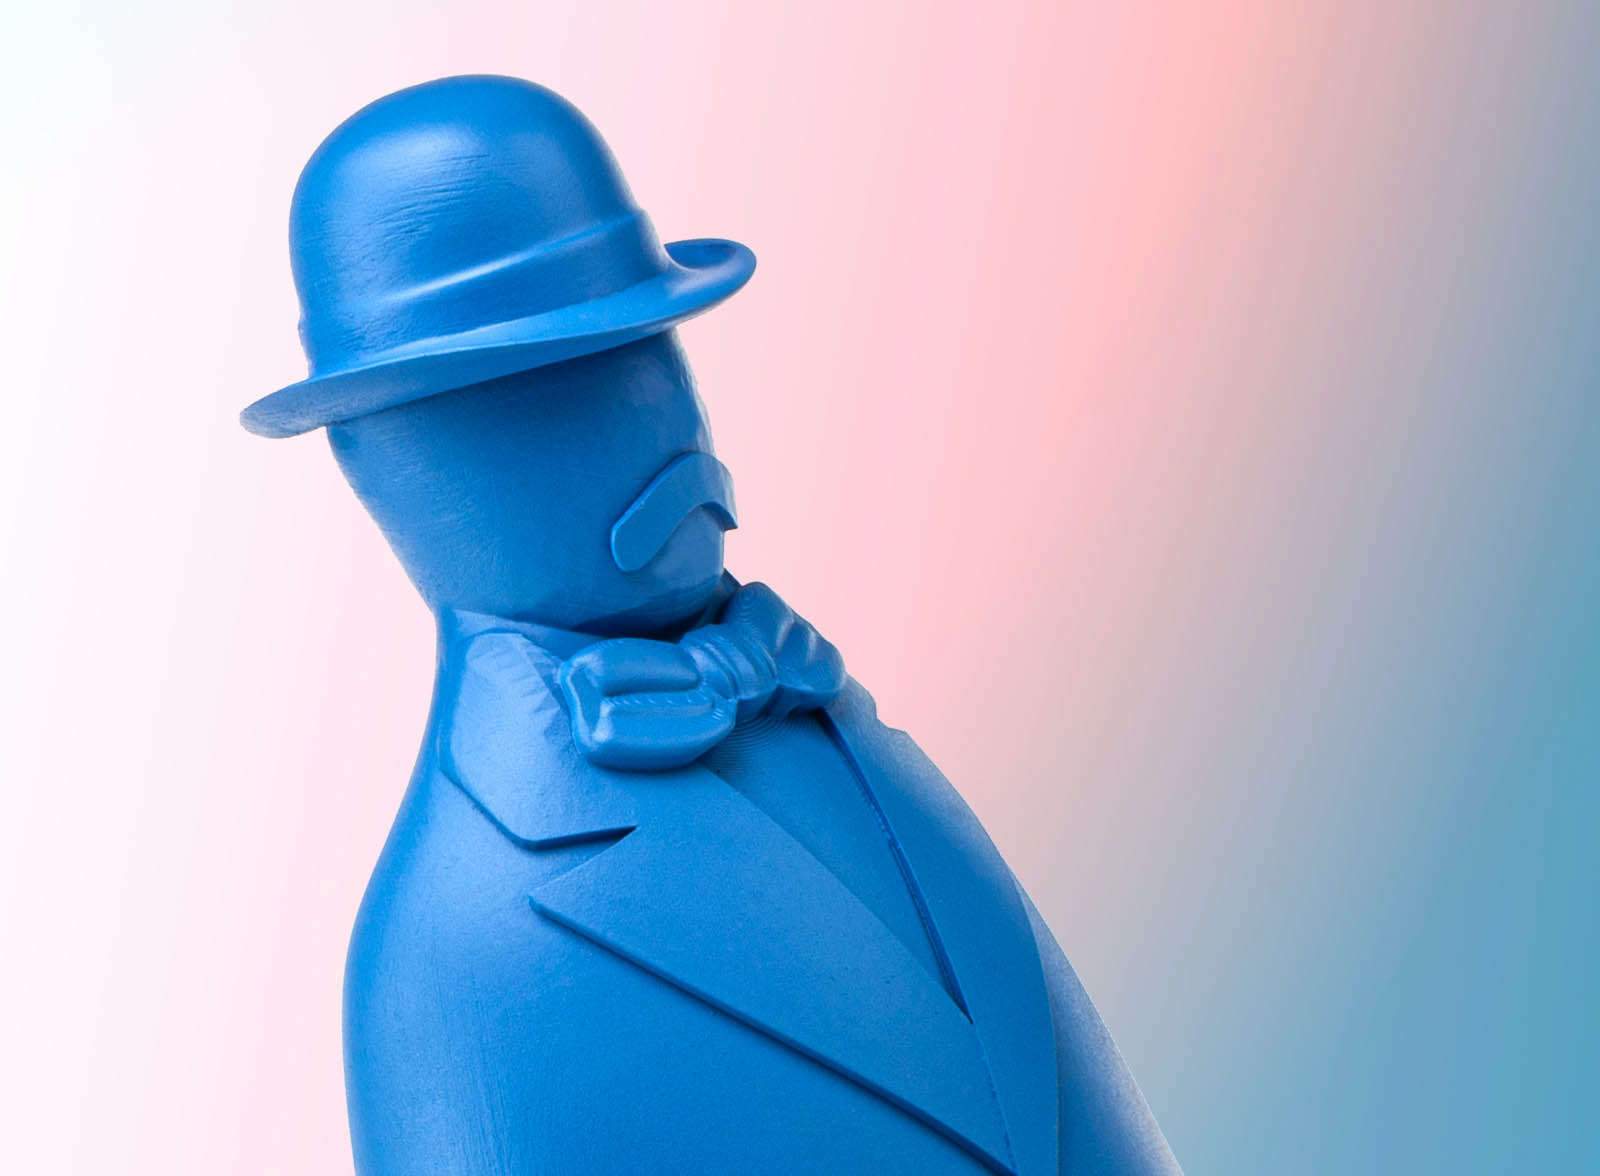 Puccini becomes a Pop icon: a design collection from 12 small sculptures